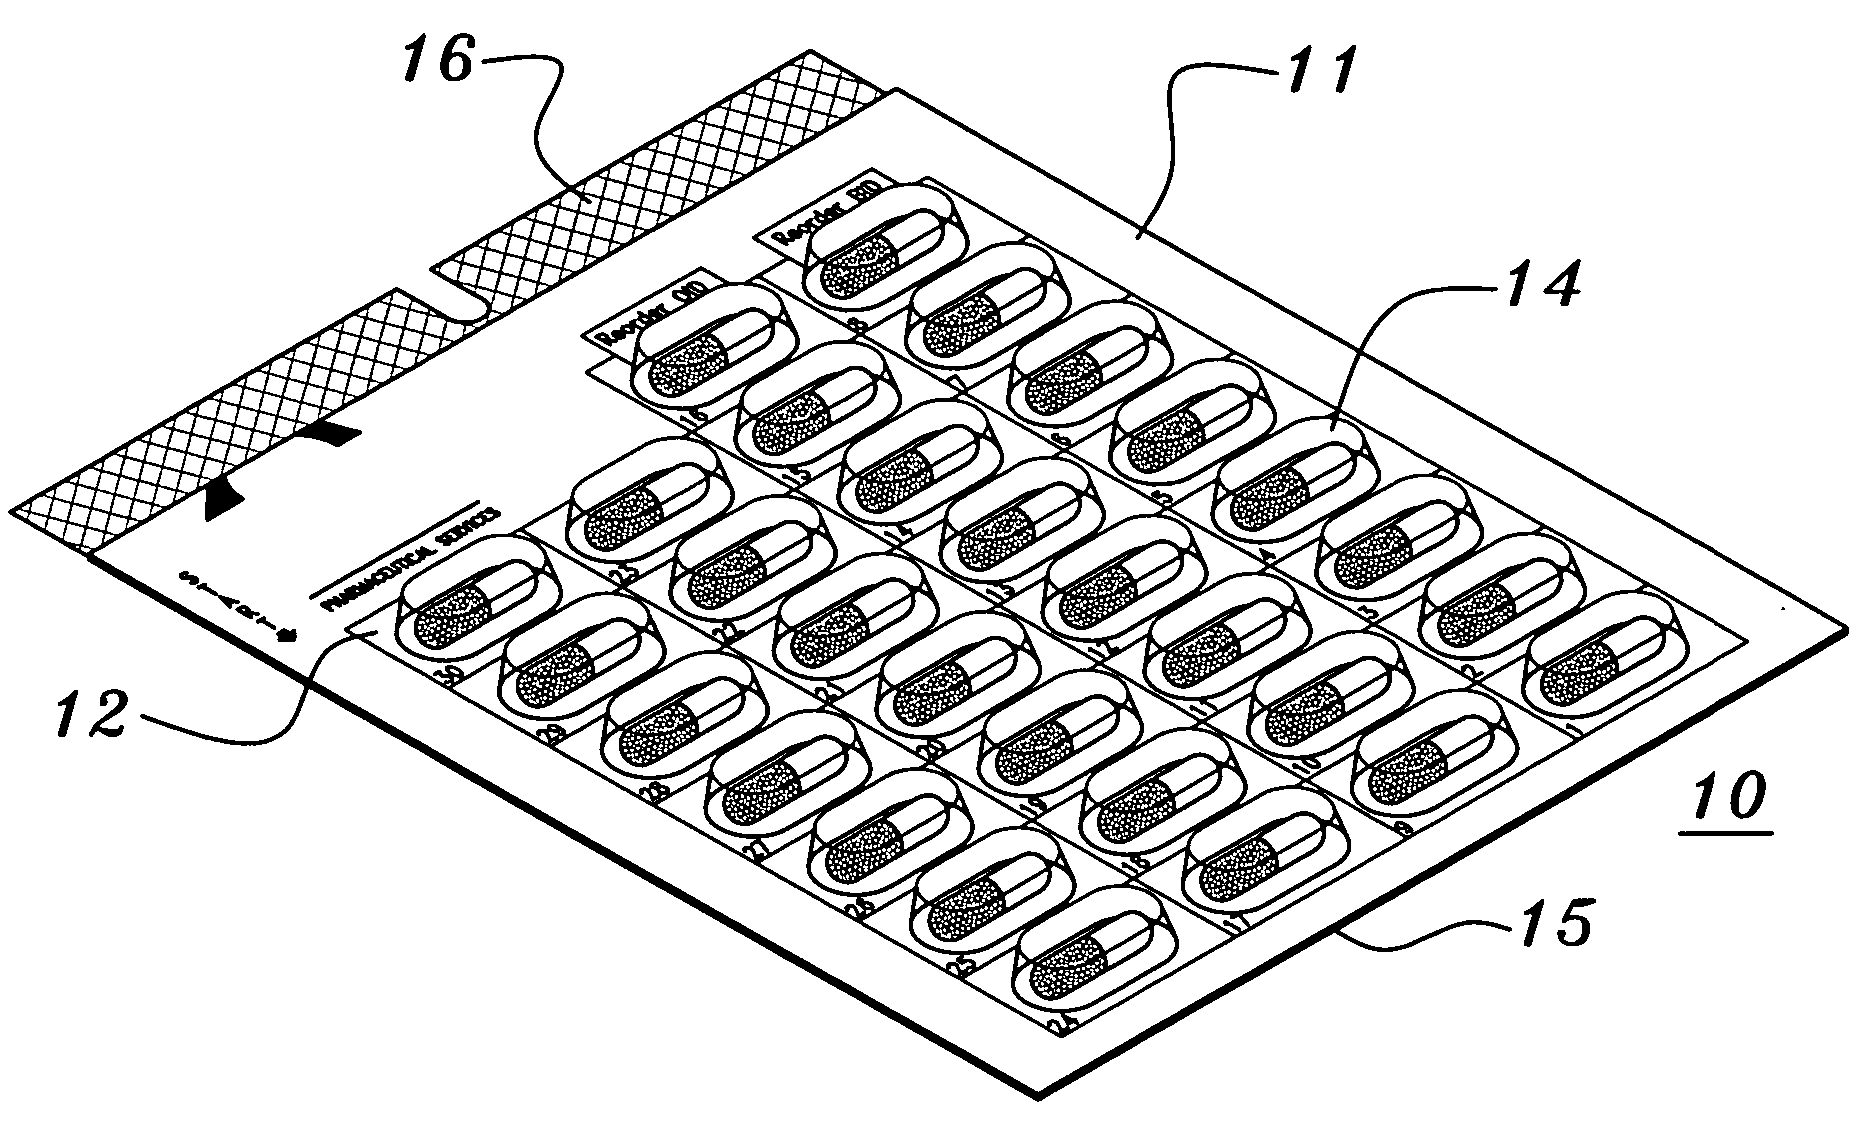 Systems and methods for storing and dispensing medication